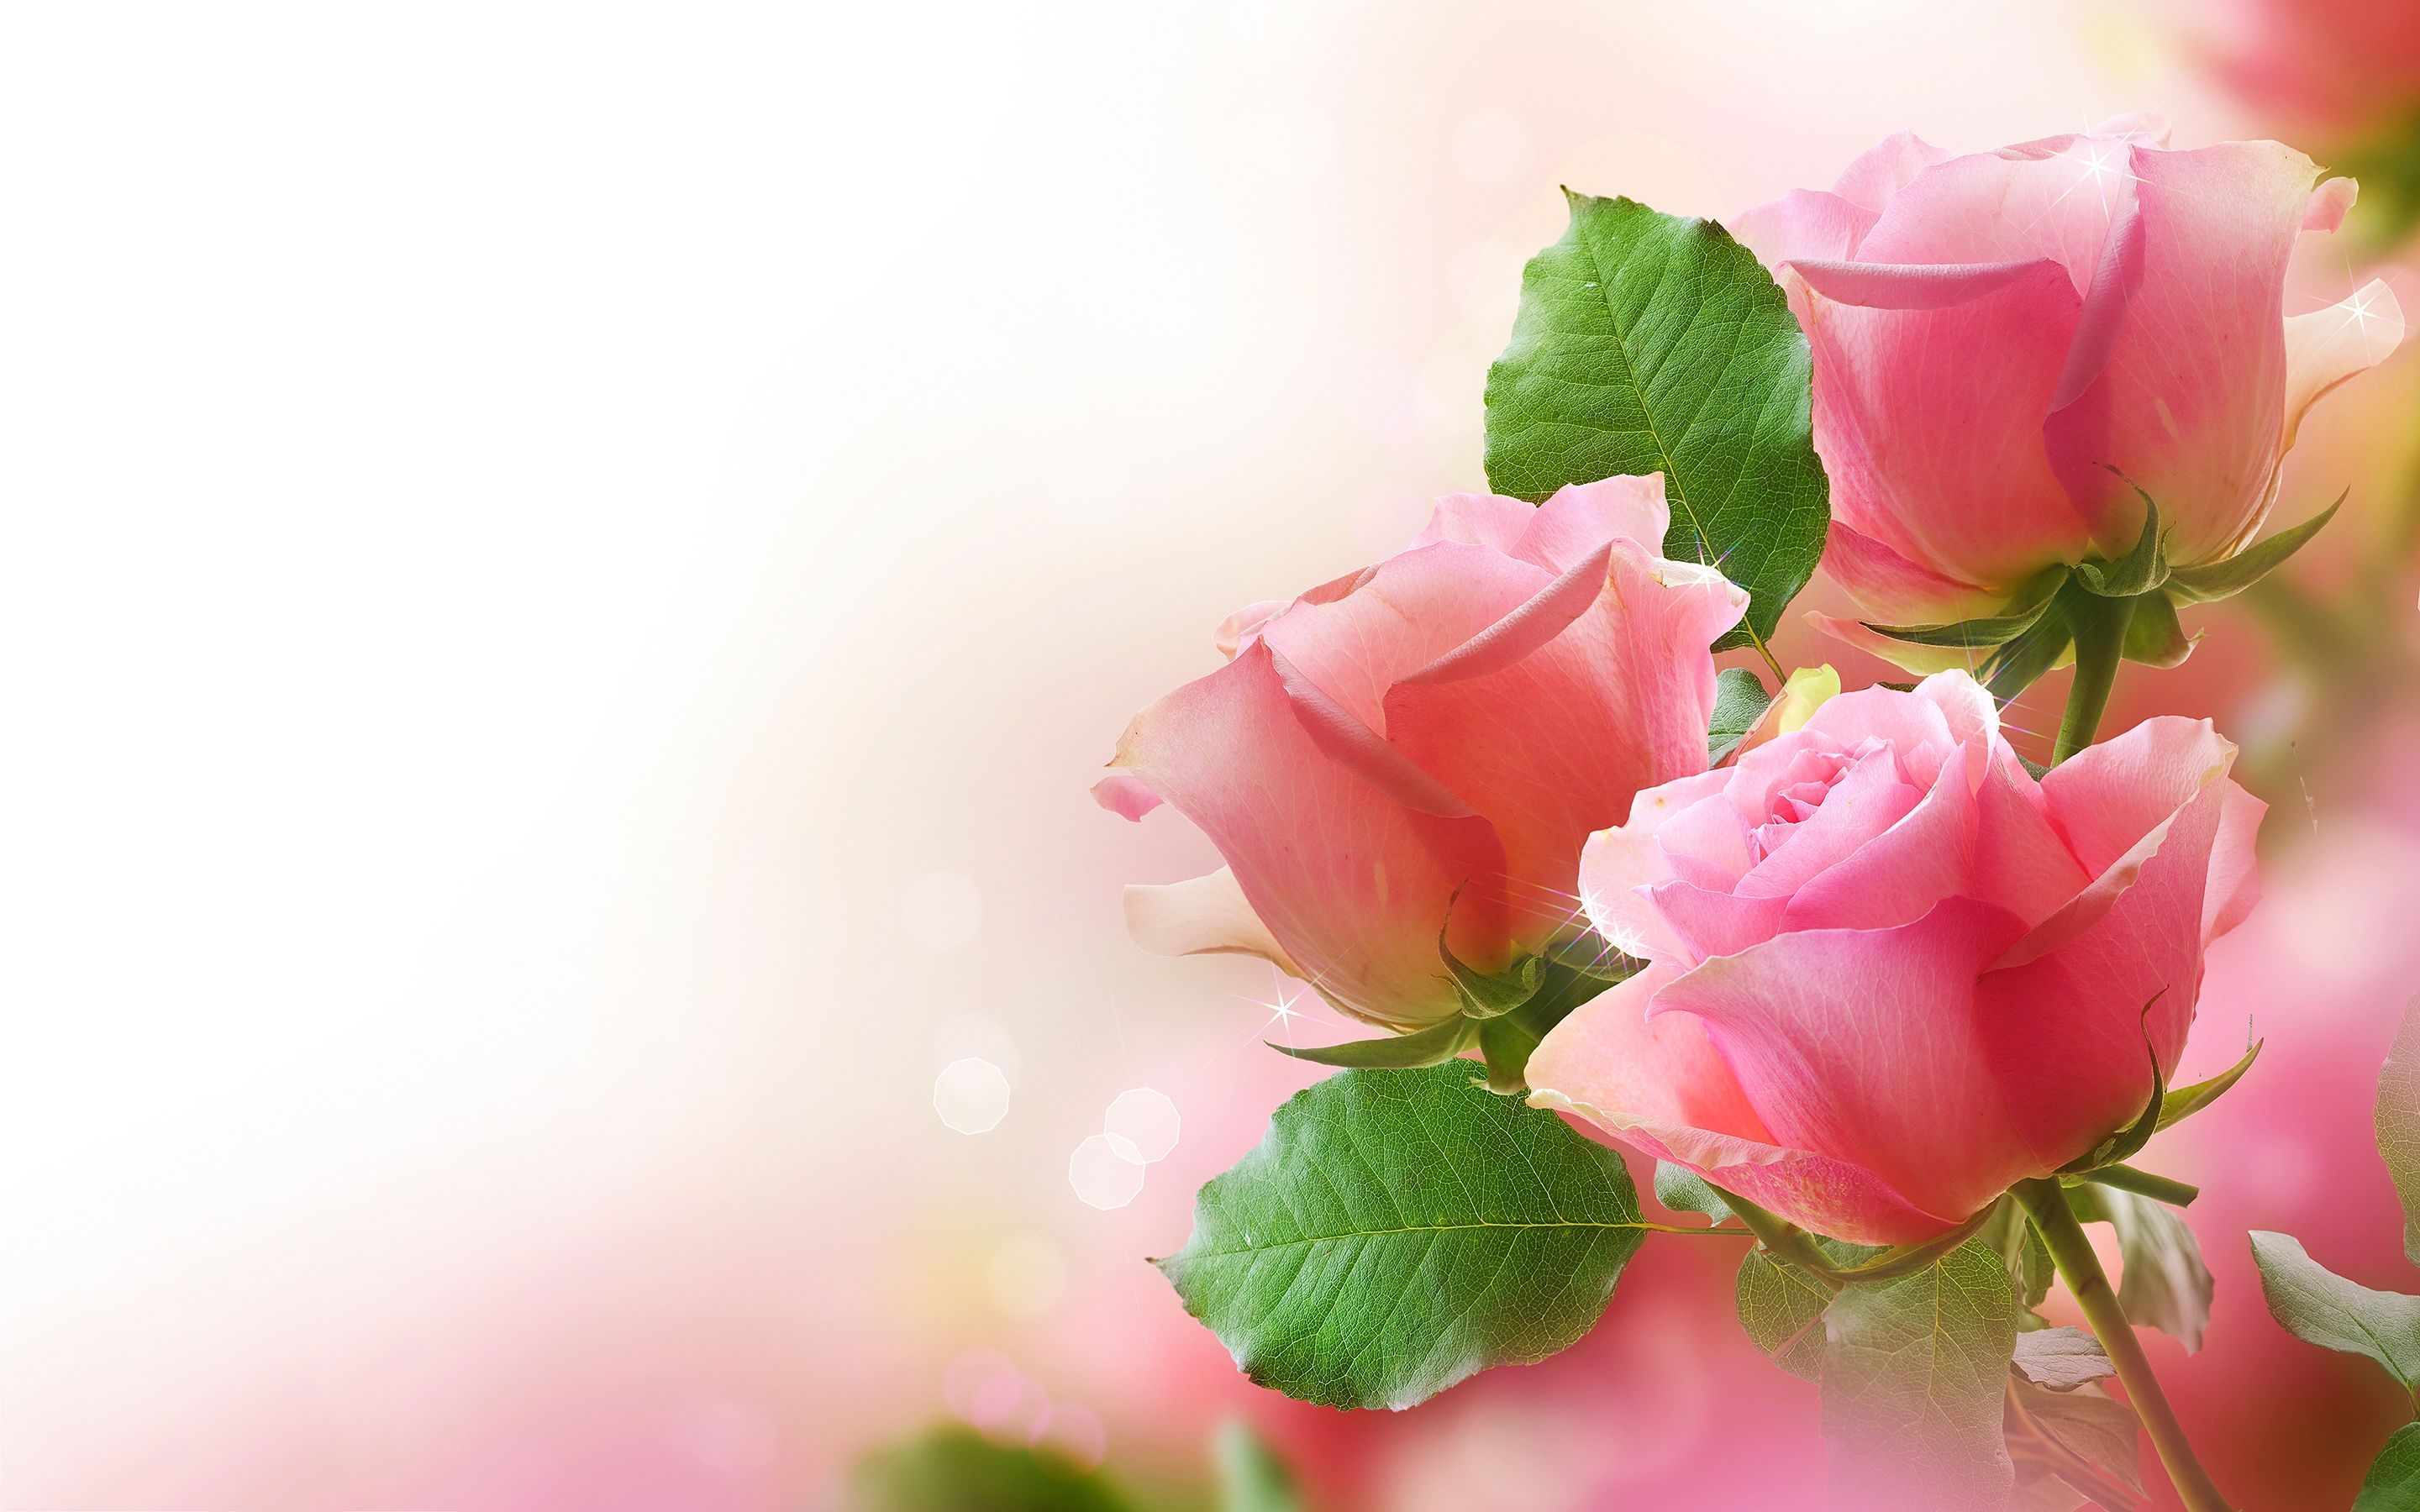 Natural rose flowers images and wallpapers Download